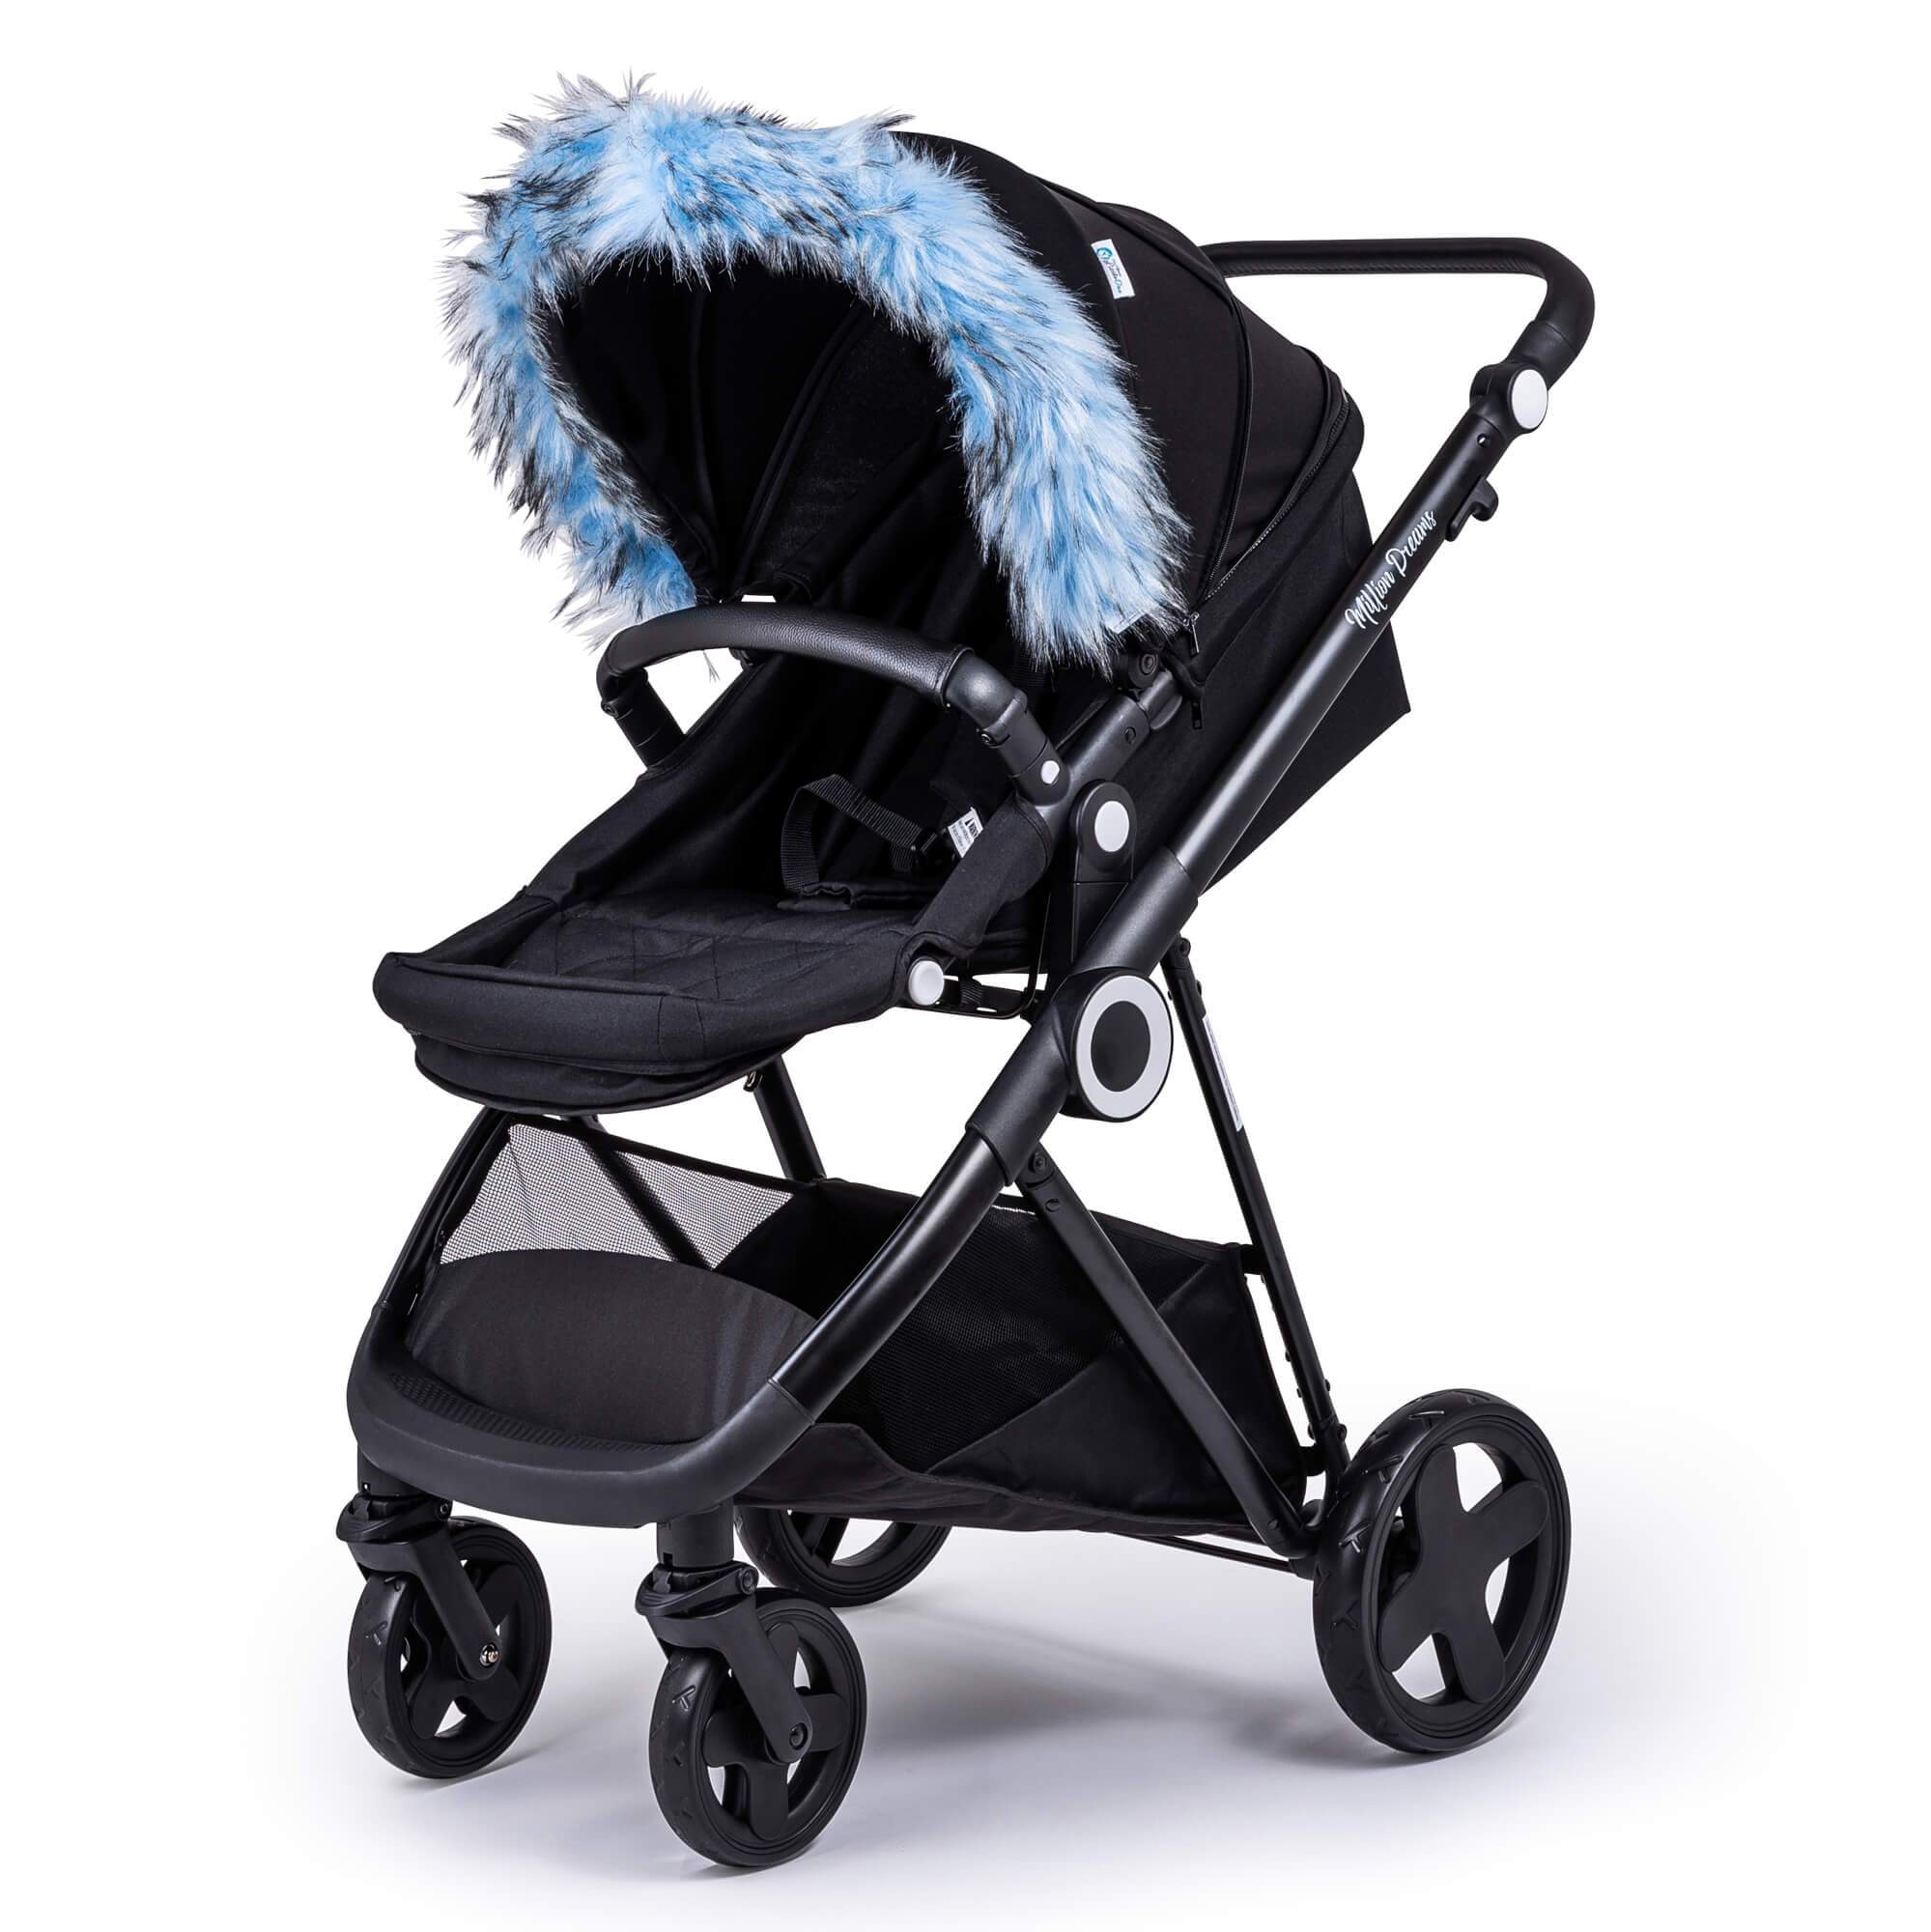 Pram Fur Hood Trim Attachment for Pushchair Compatible with Venicci - Light Blue / Fits All Models | For Your Little One